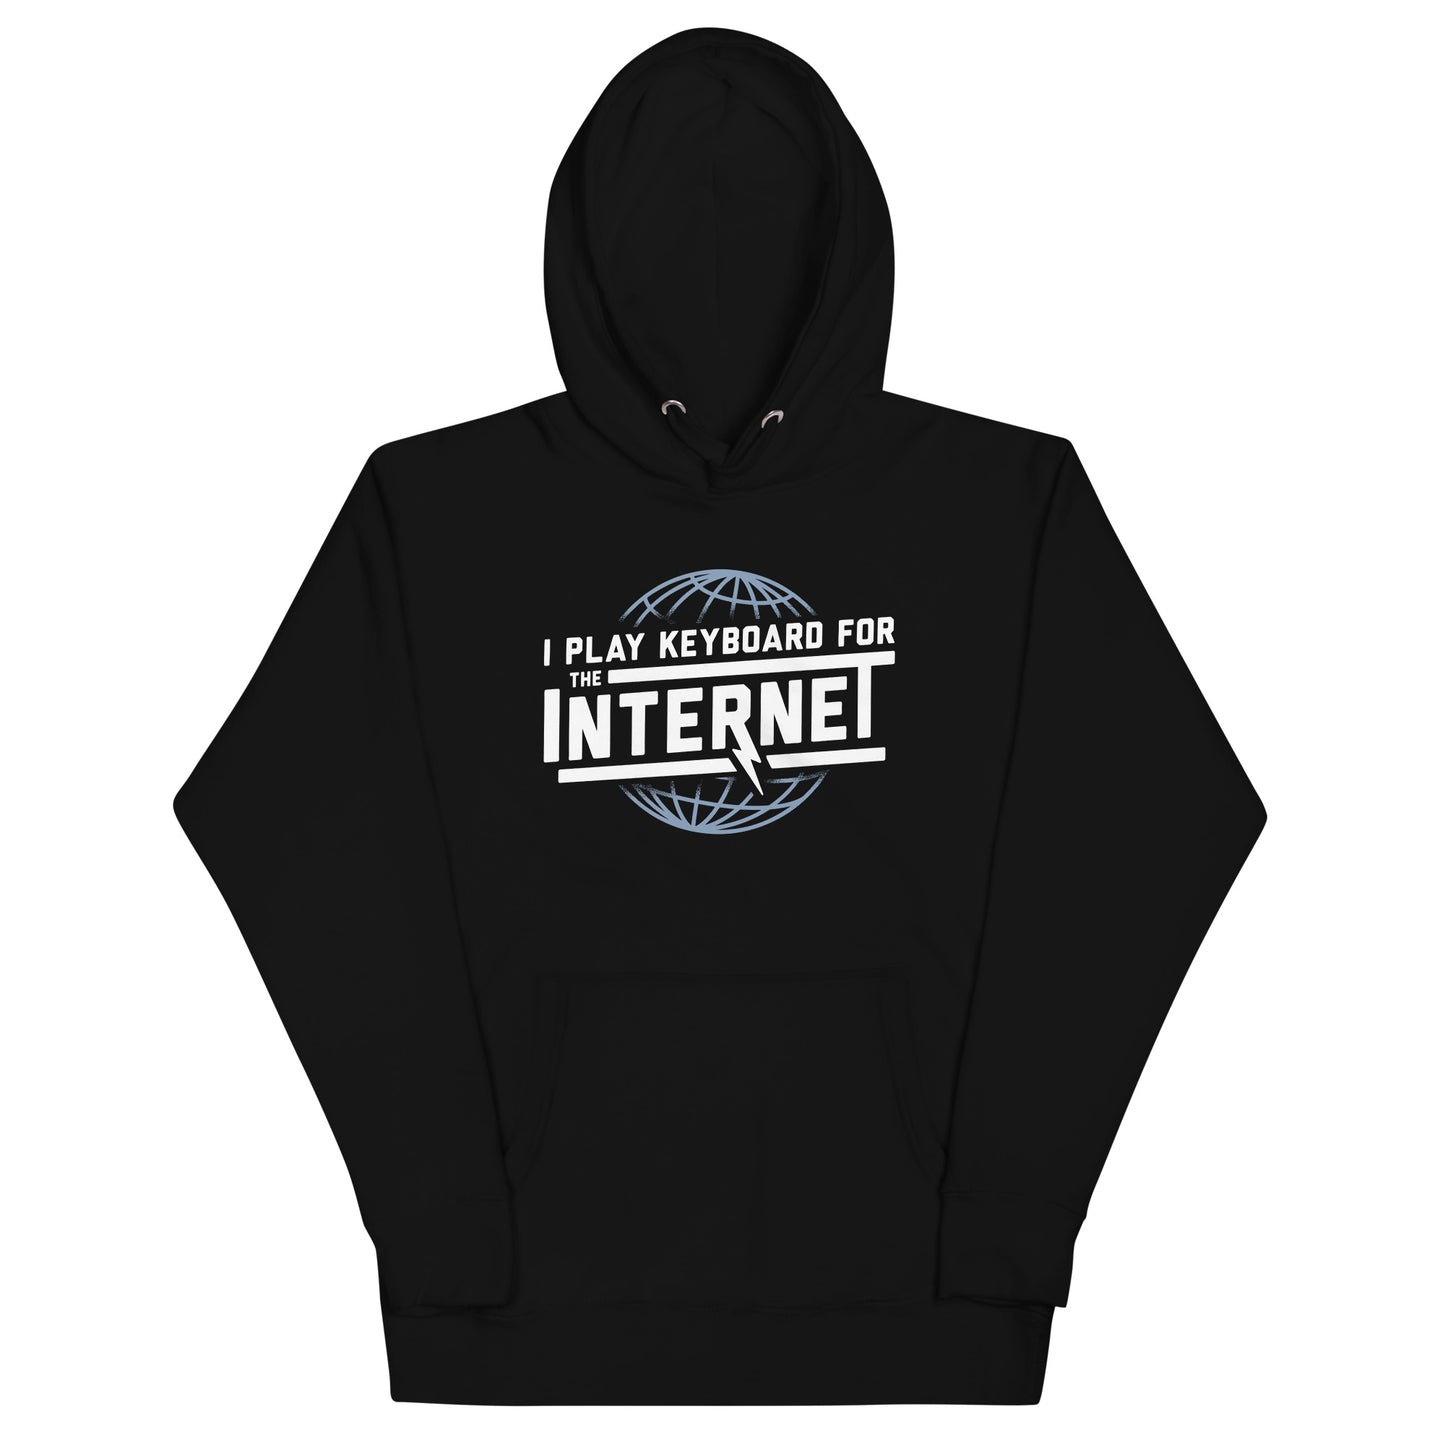 I Play Keyboard For The Internet Unisex Hoodie